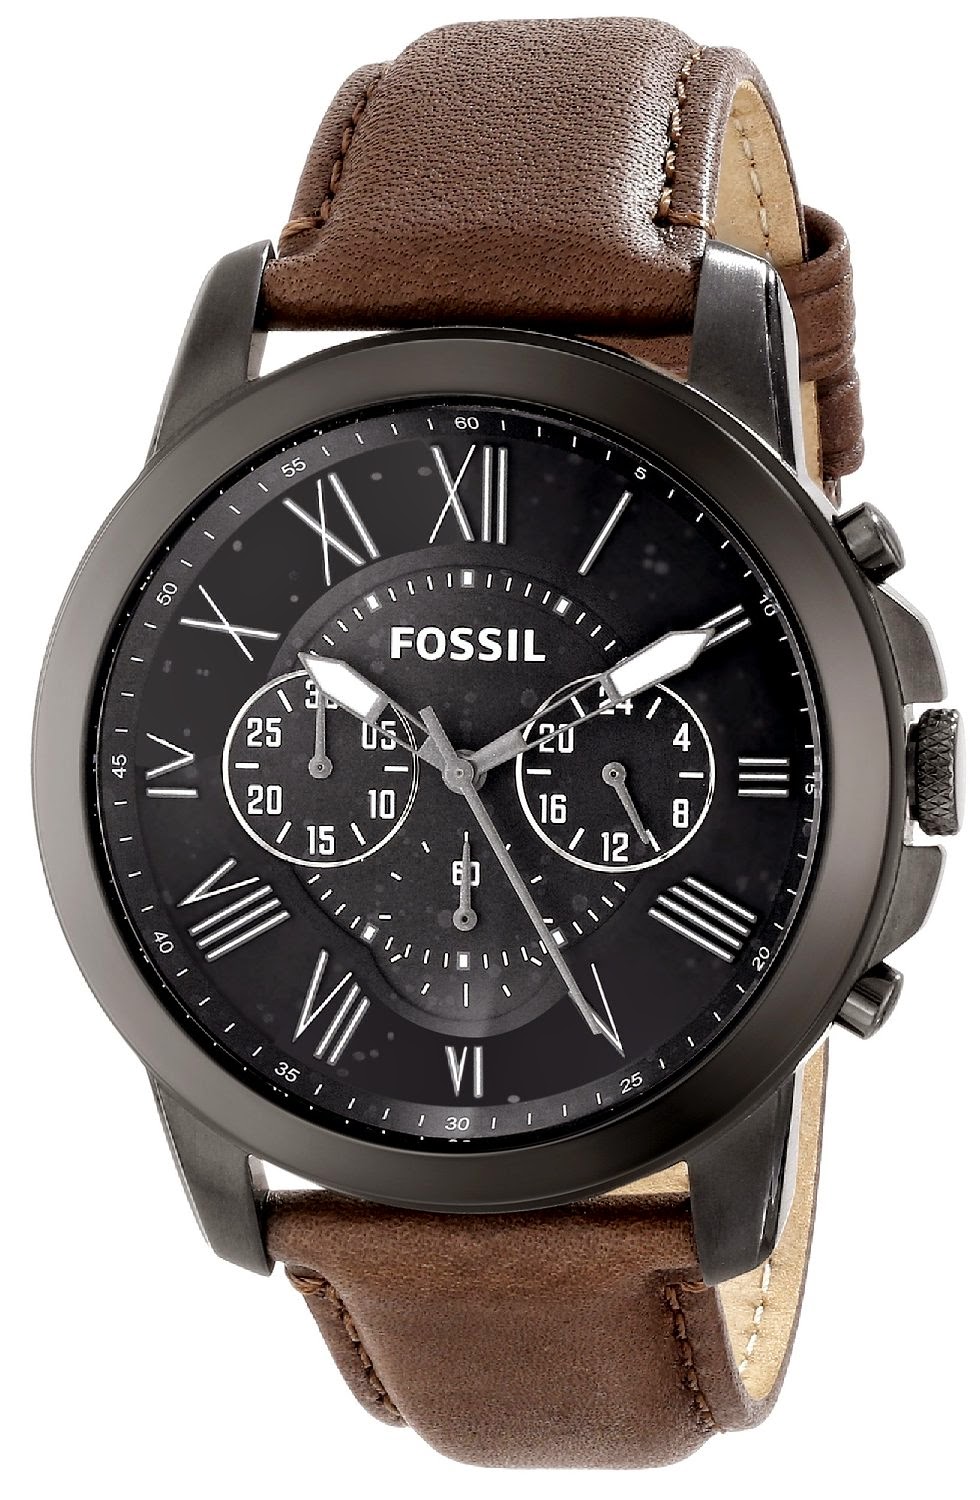 Fossil-Men's-watches-FS4885-Grant-Analog-Quartz-Watch-with-Brown ...